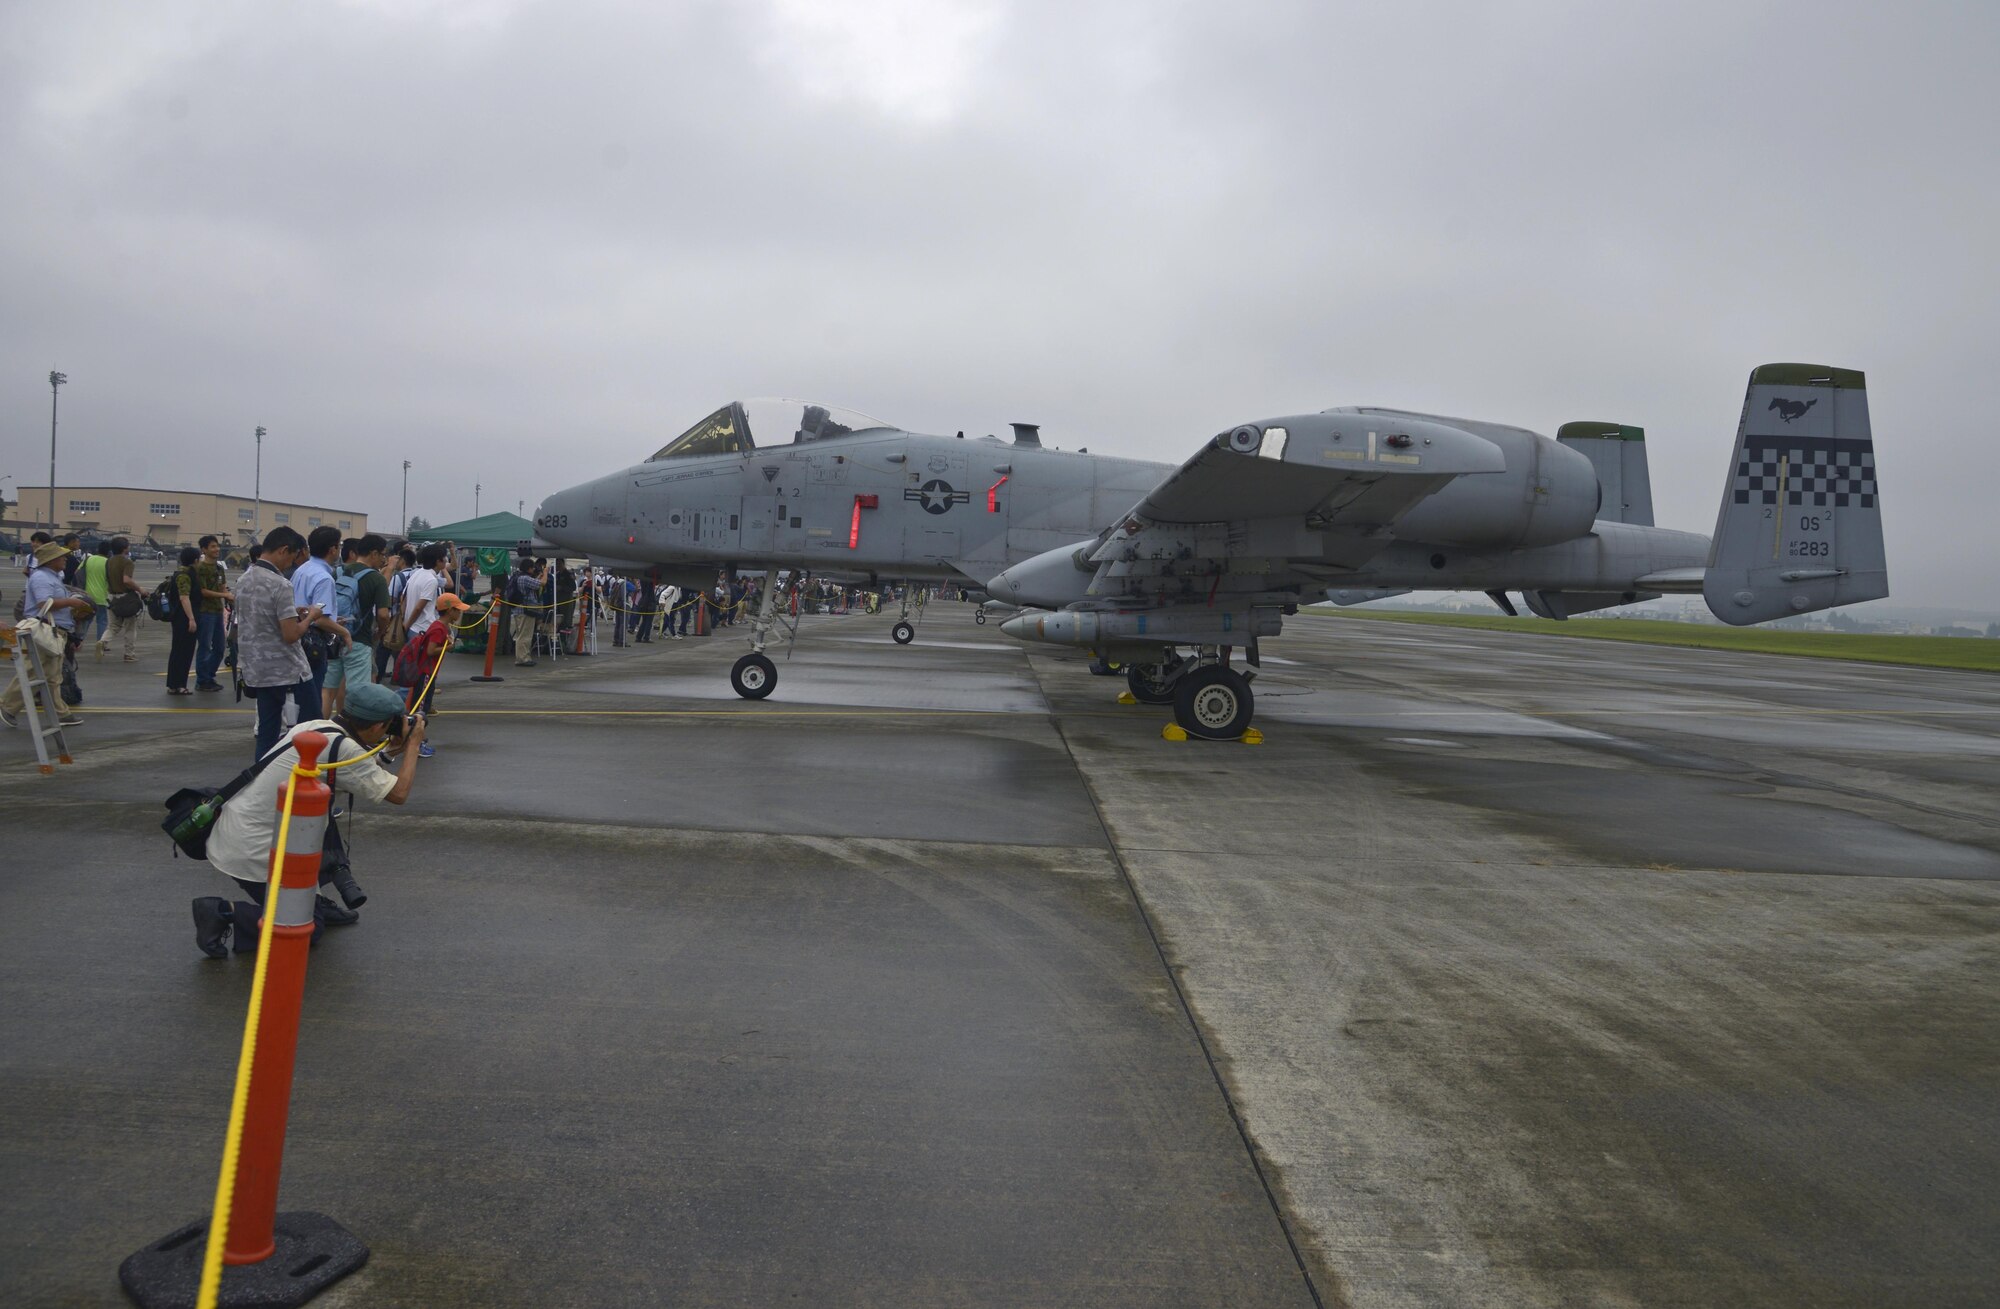 Spectators take pictures of A-10 Thunderbolt II aircraft at the Friendship Festival at Yokota Air Base, Japan, Sept. 18, 2016. The festival was an opportunity for visitors to experience American fun and culture, while strengthening the bonds between Yokota and the local communities. (U.S. Air Force photo by Senior Airman David Owsianka/Released)